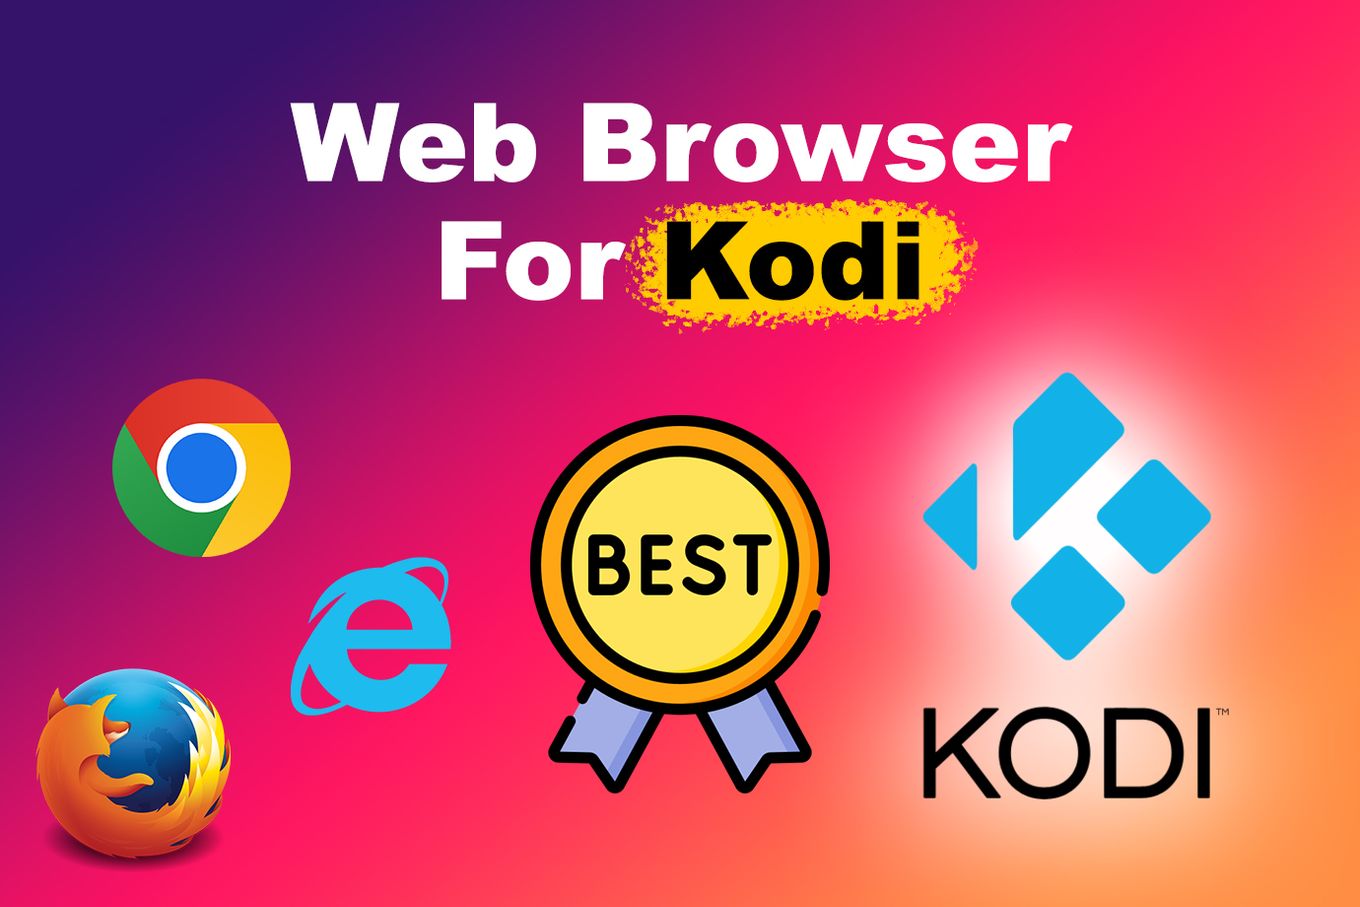 How to Use Web Browsers for Kodi